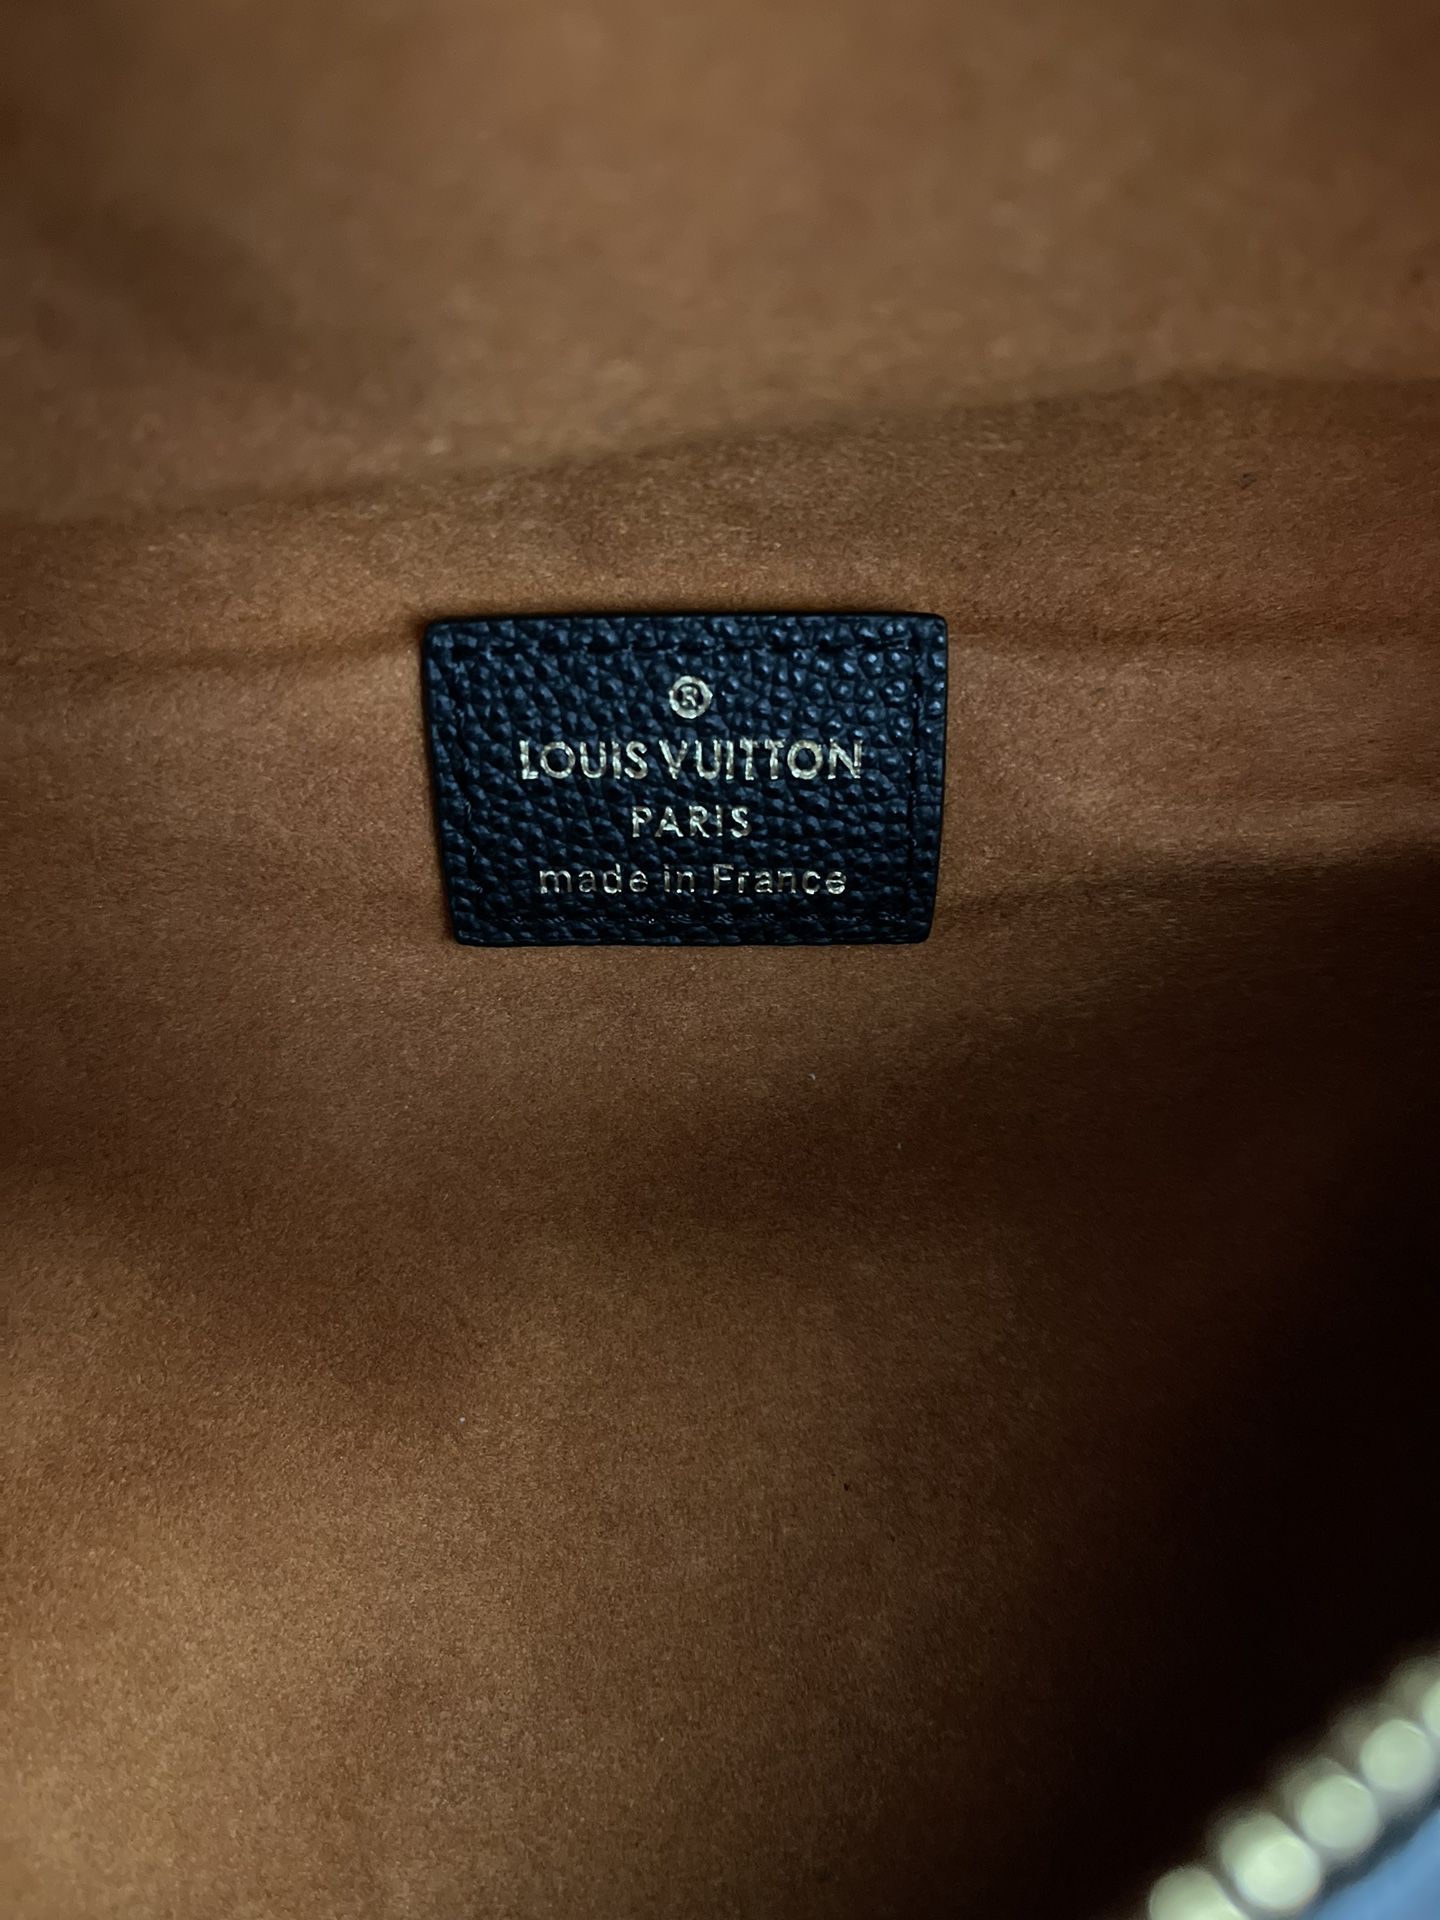 Lv Bum Bag Leather for Sale in Pomona, CA - OfferUp